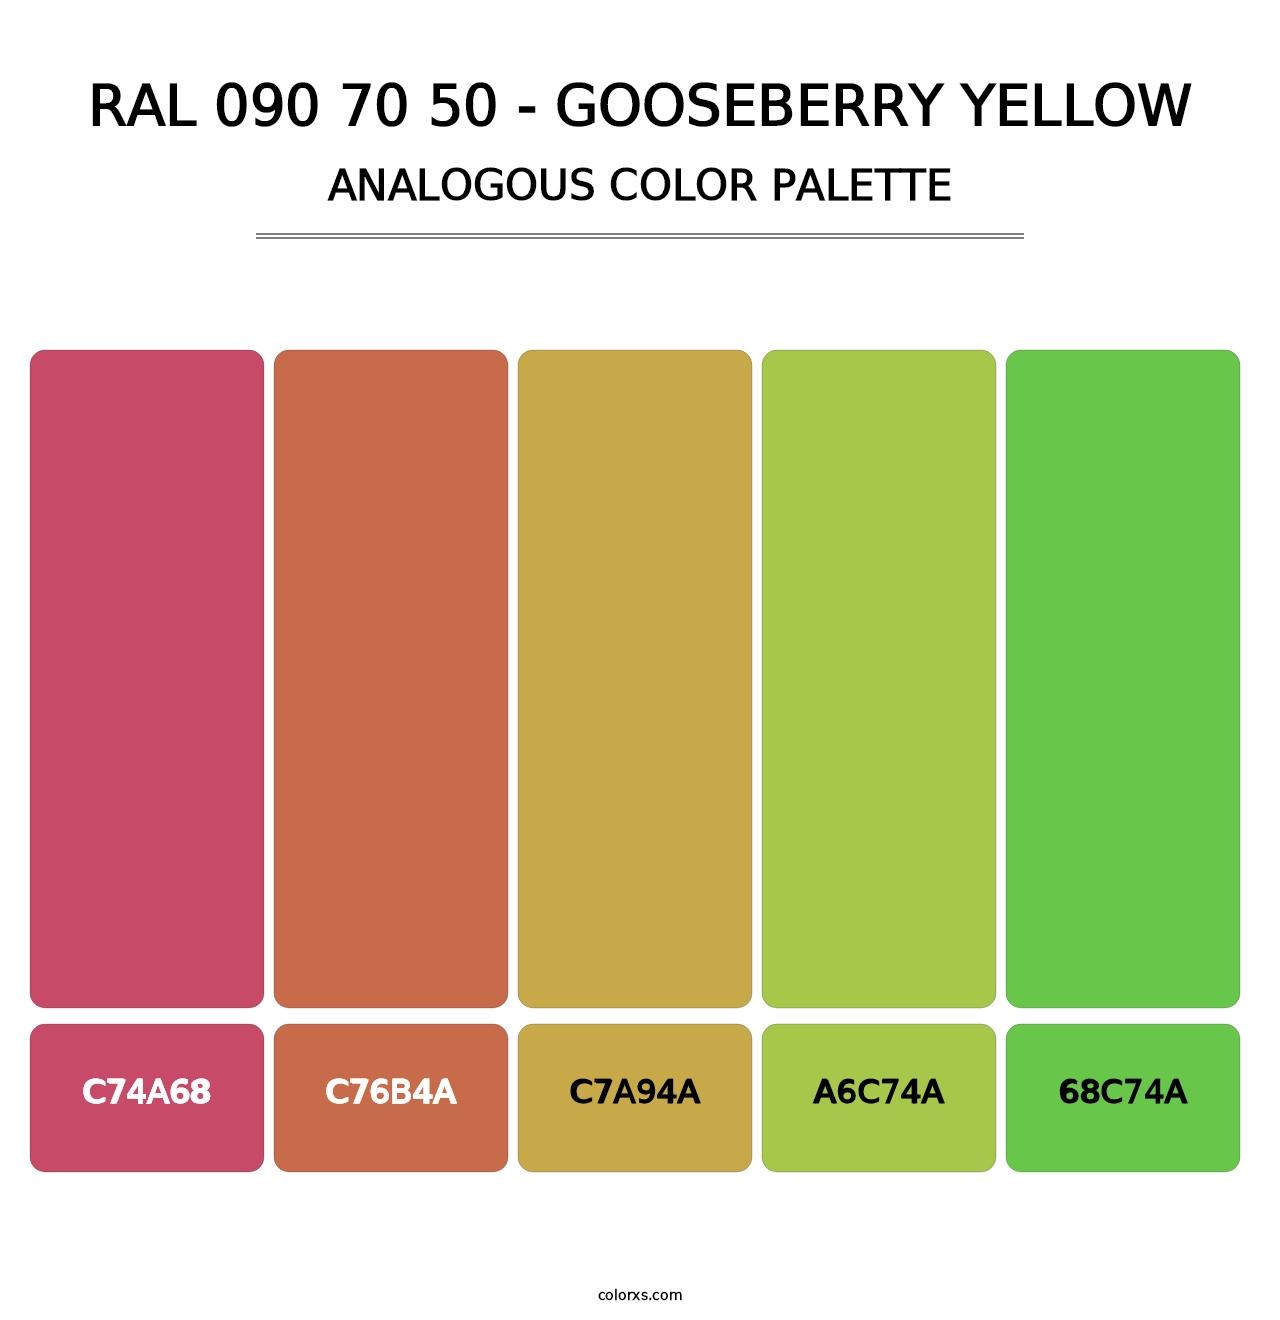 RAL 090 70 50 - Gooseberry Yellow - Analogous Color Palette